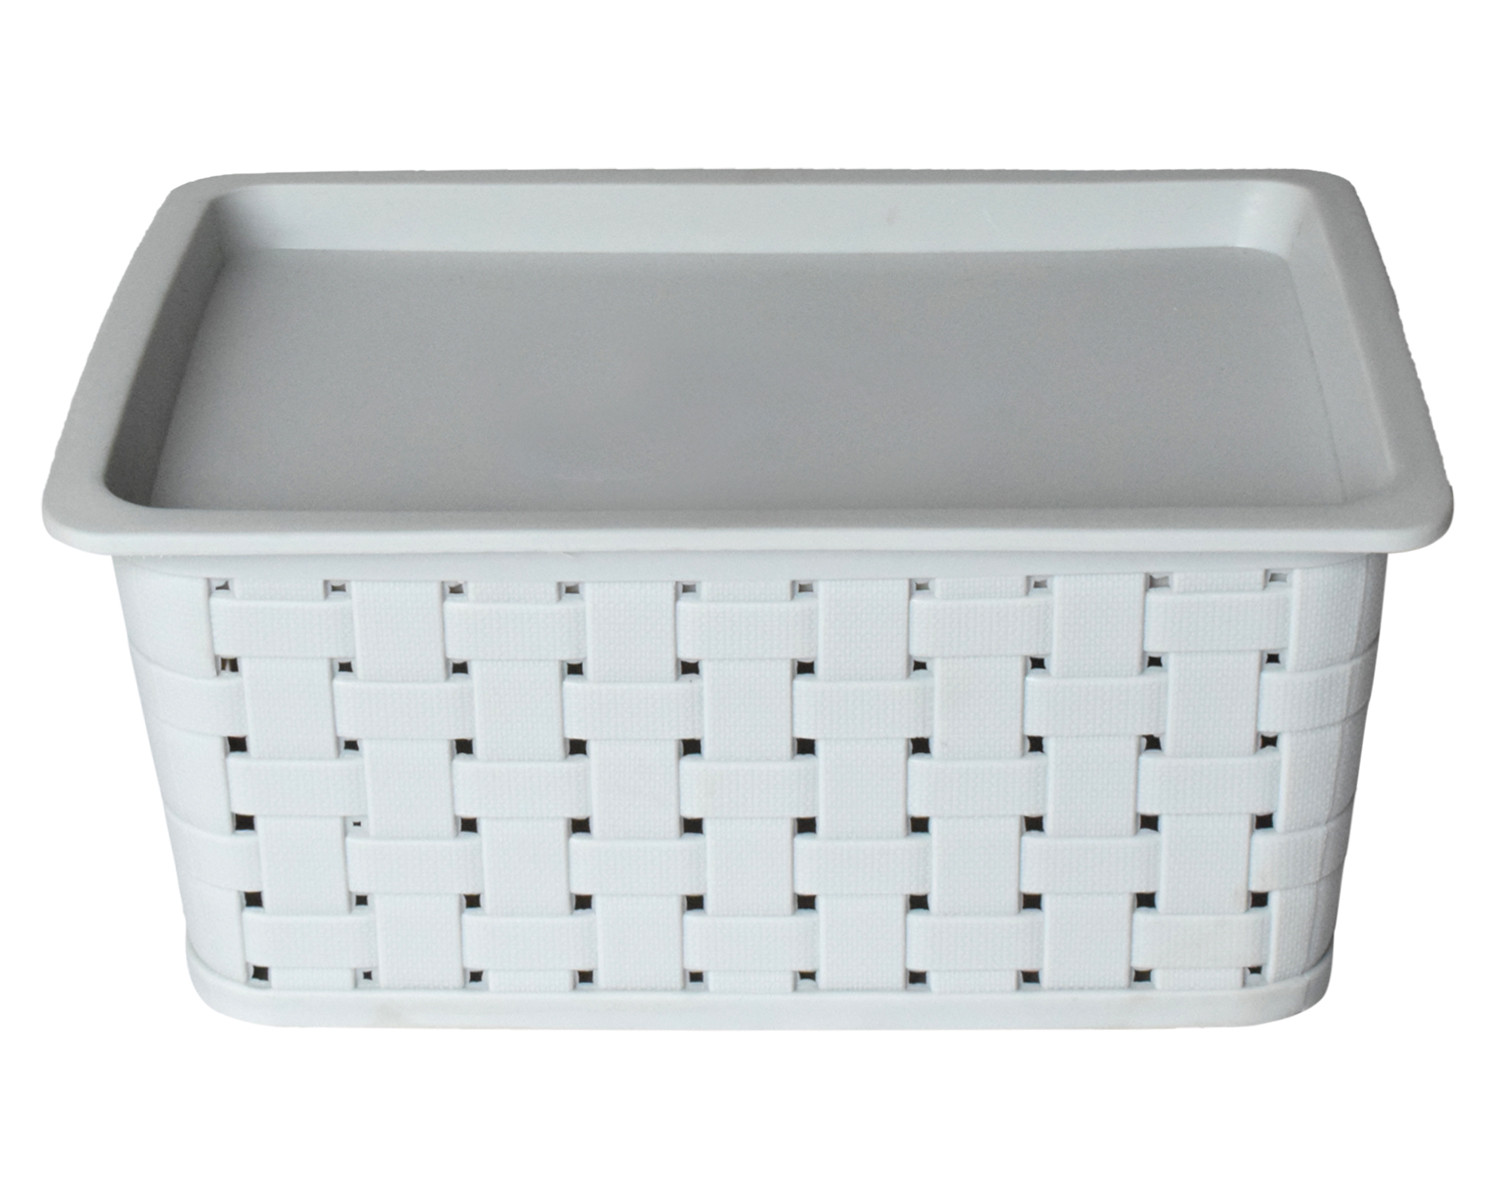 Kuber Industries BPA Free Attractive Design Multipurpose Small Trendy Storage Basket With Lid|Material-Plastic|Color-Gray|Pack of 2